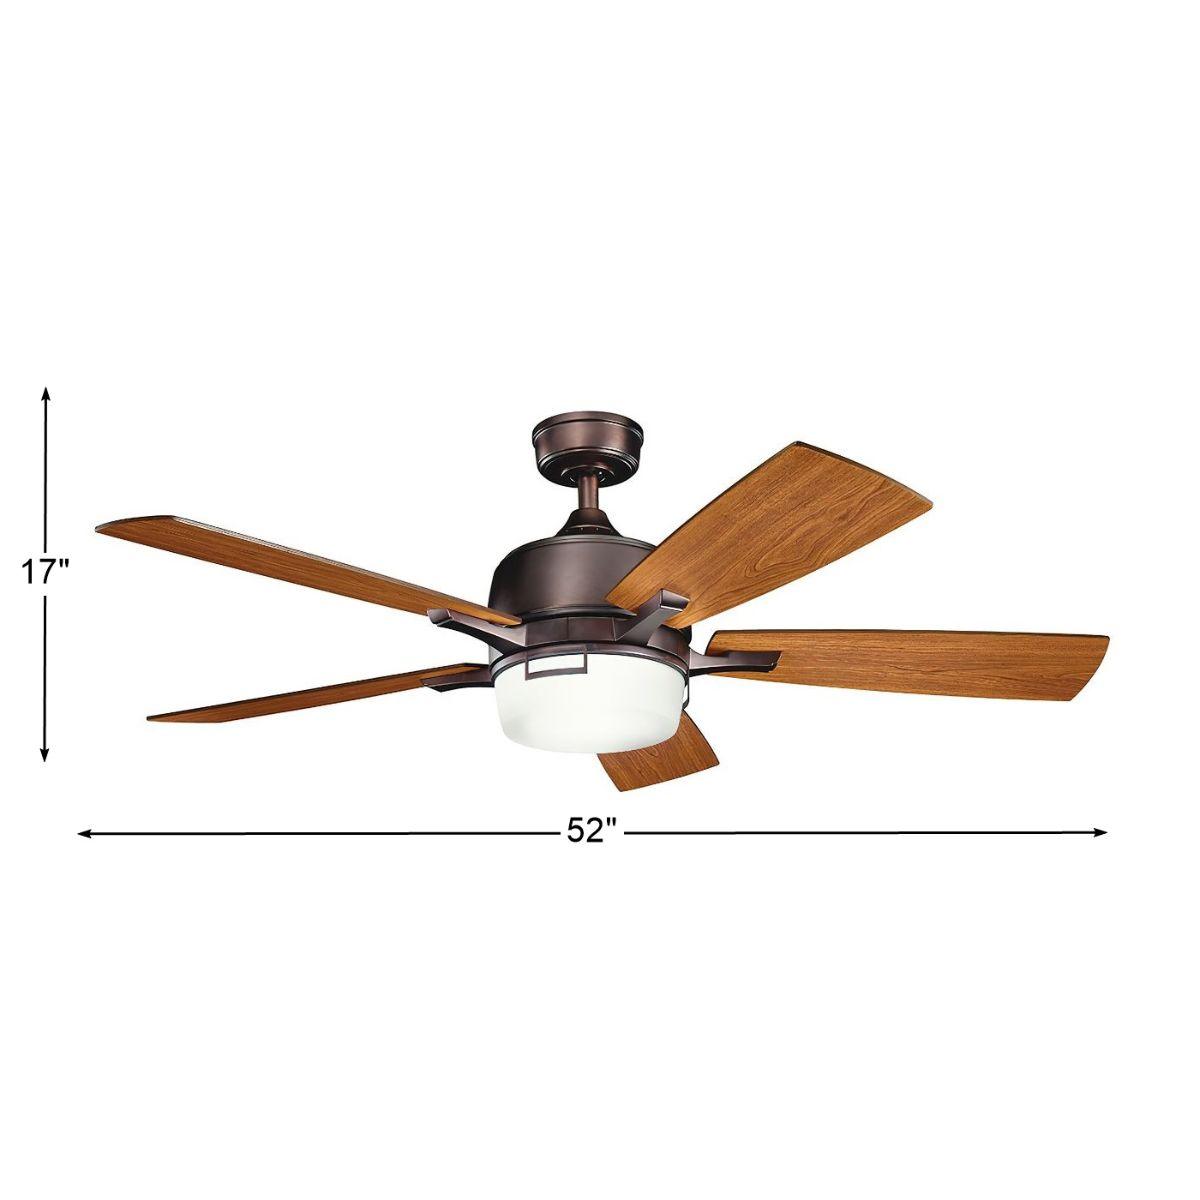 Leeds 52 Inch Ceiling Fan With Light, Wall Control Included